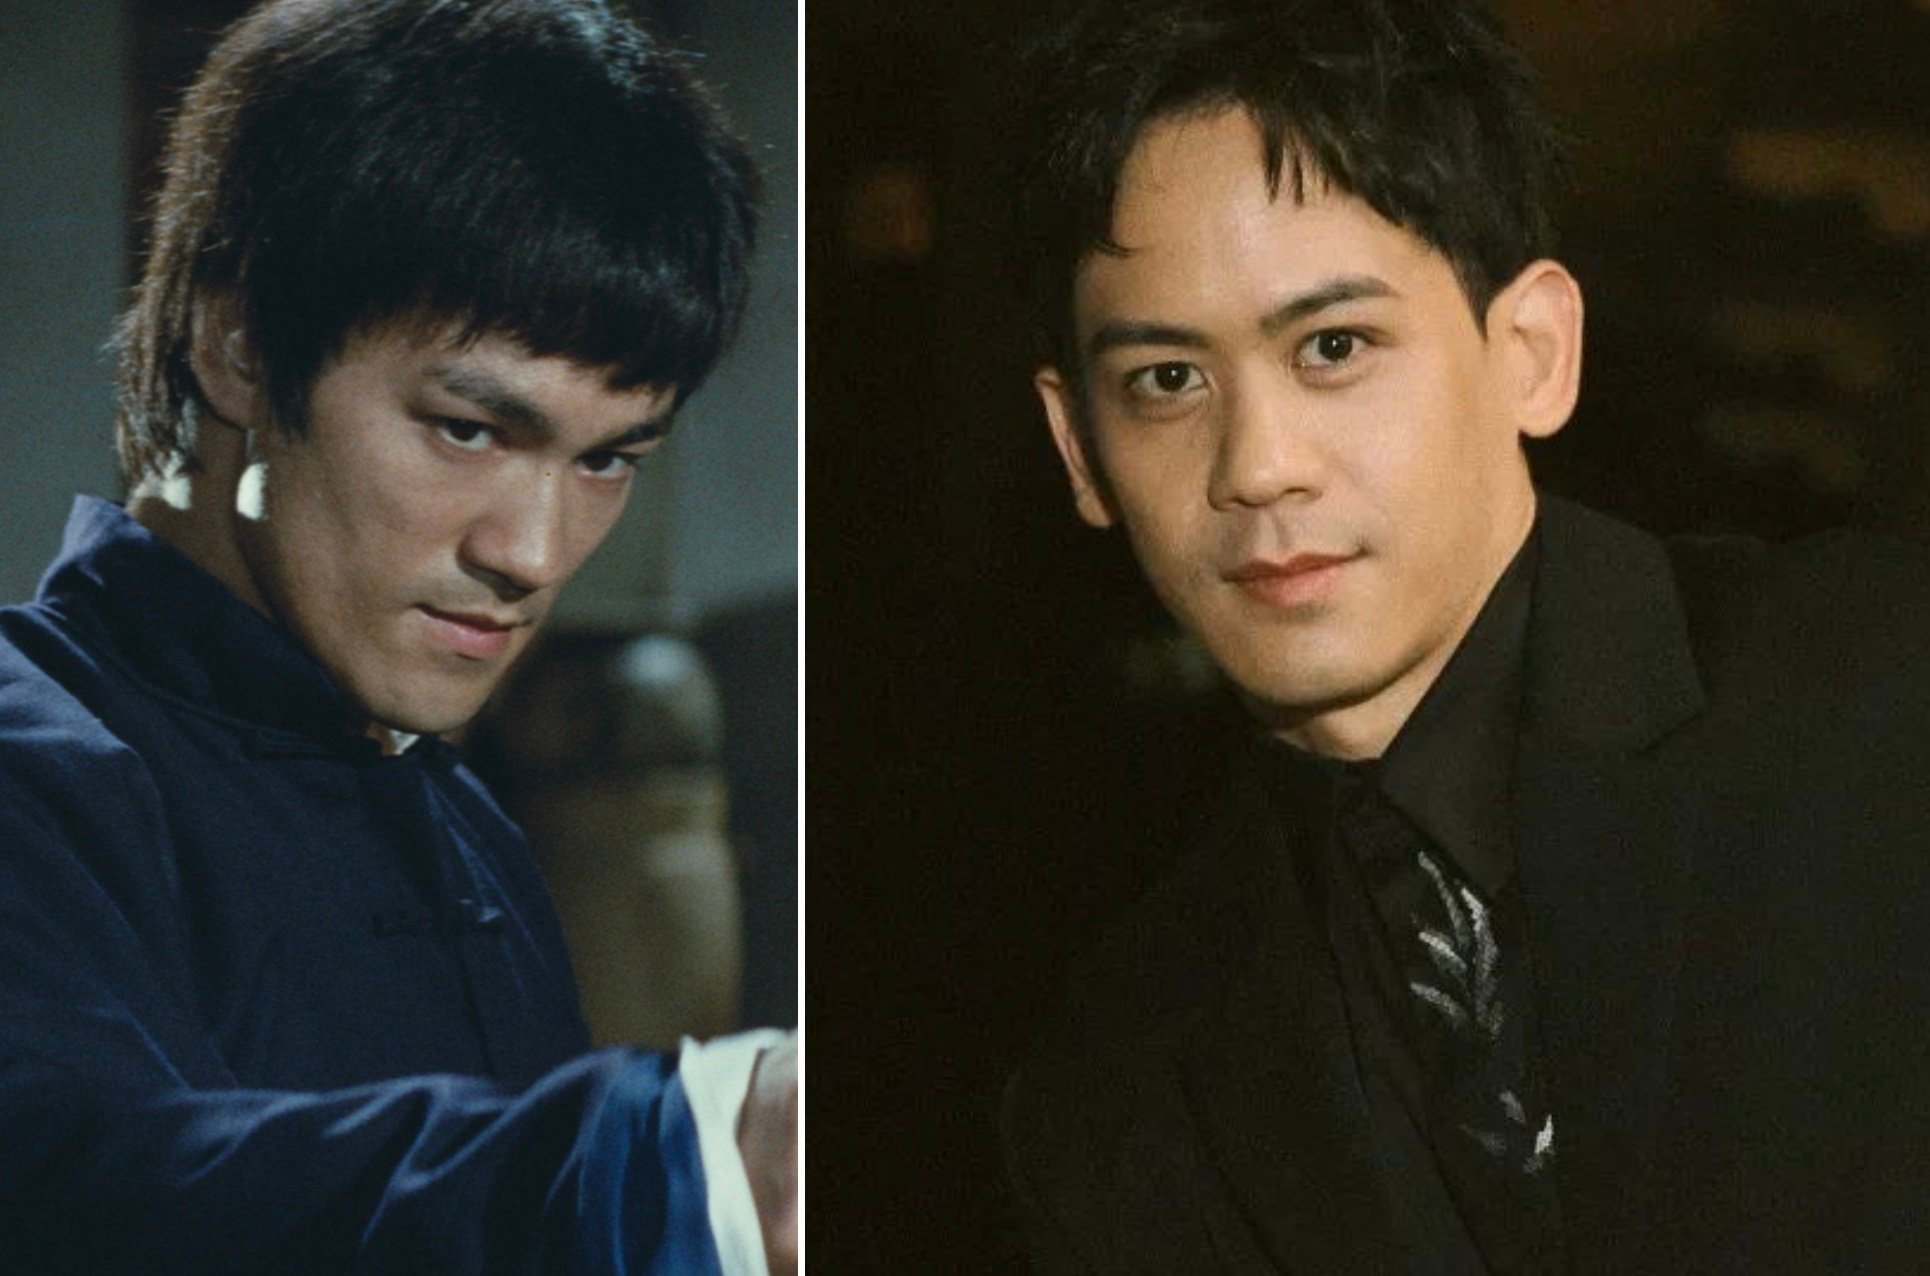 Mason Lee will play Bruce Lee in the upcoming biopic. Photos: Criterion Collection, @masonleechwen/Instagram